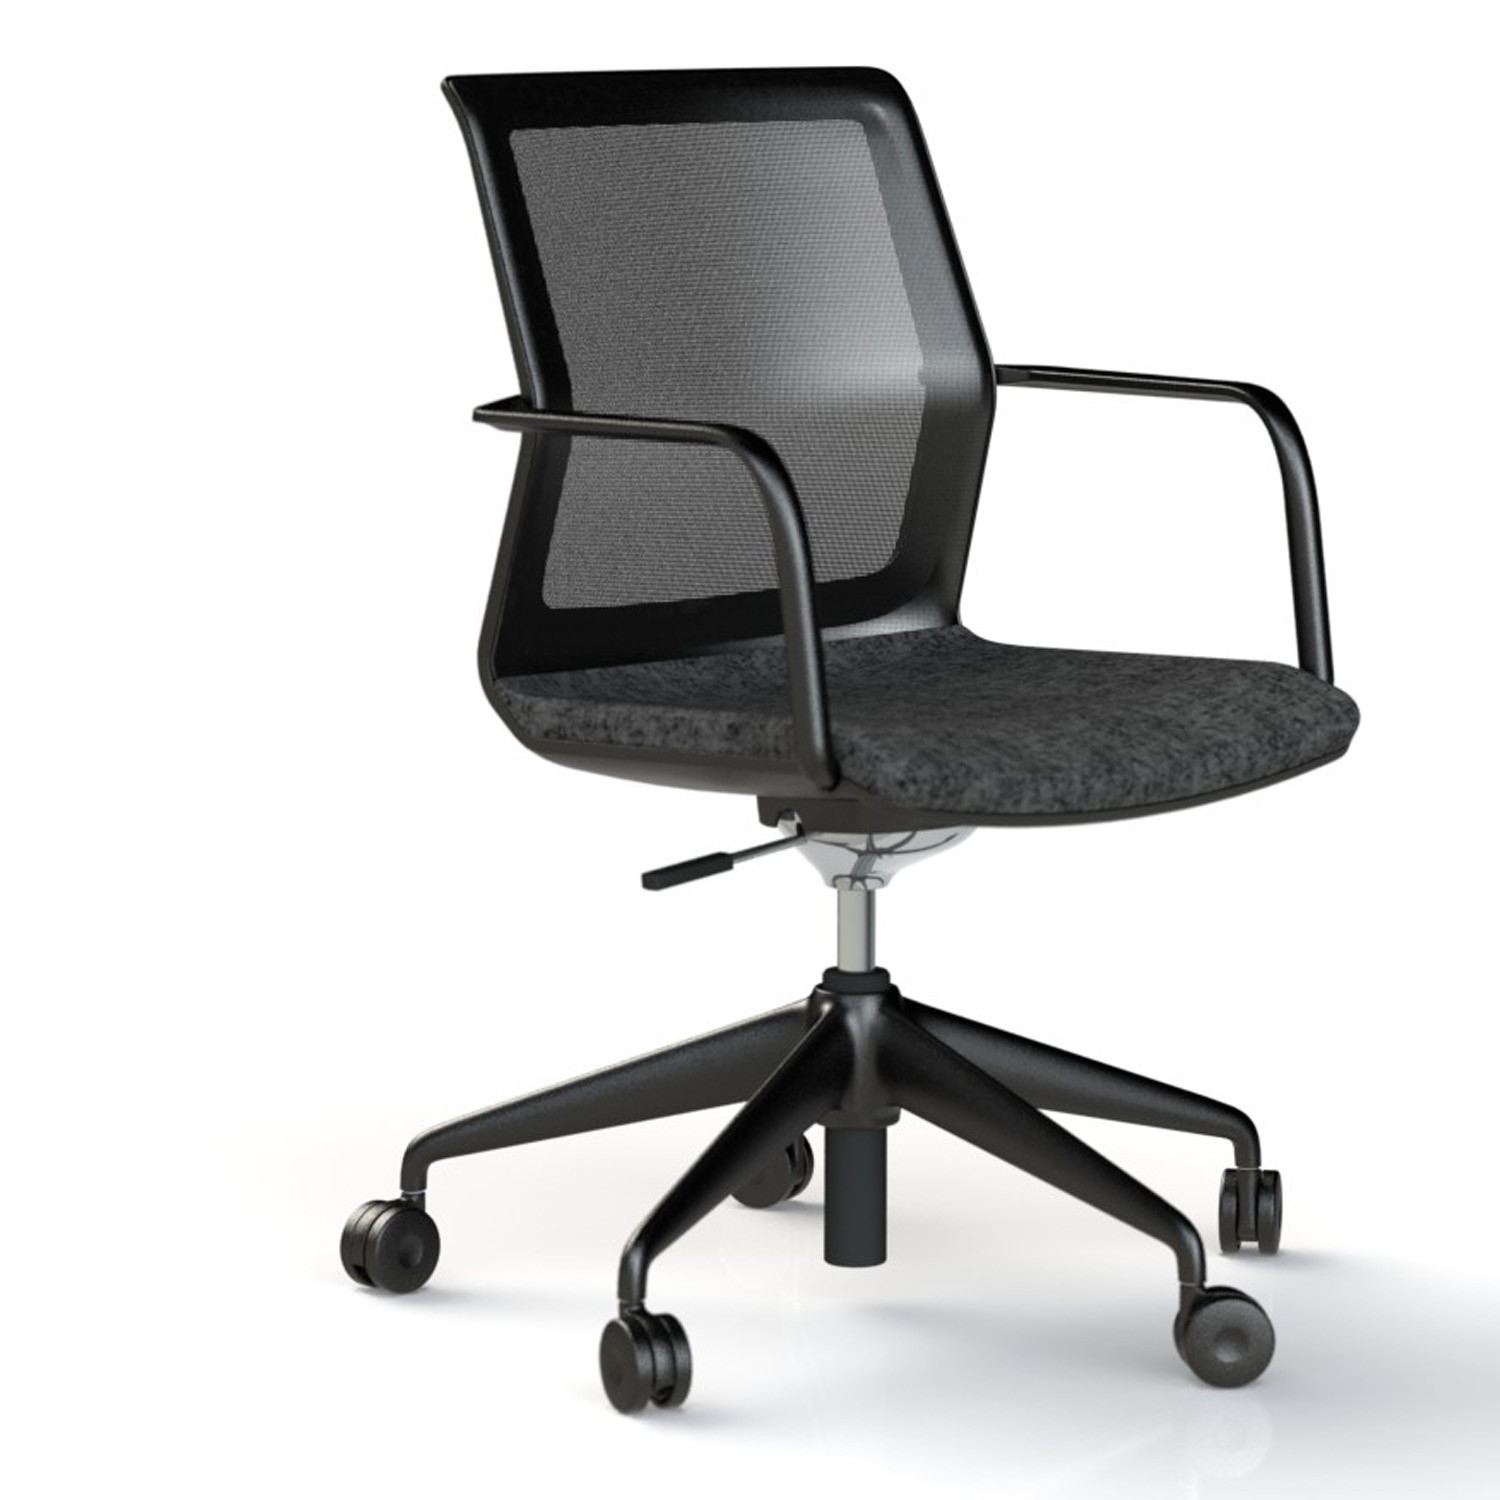 Workday 4-leg Chair with castors